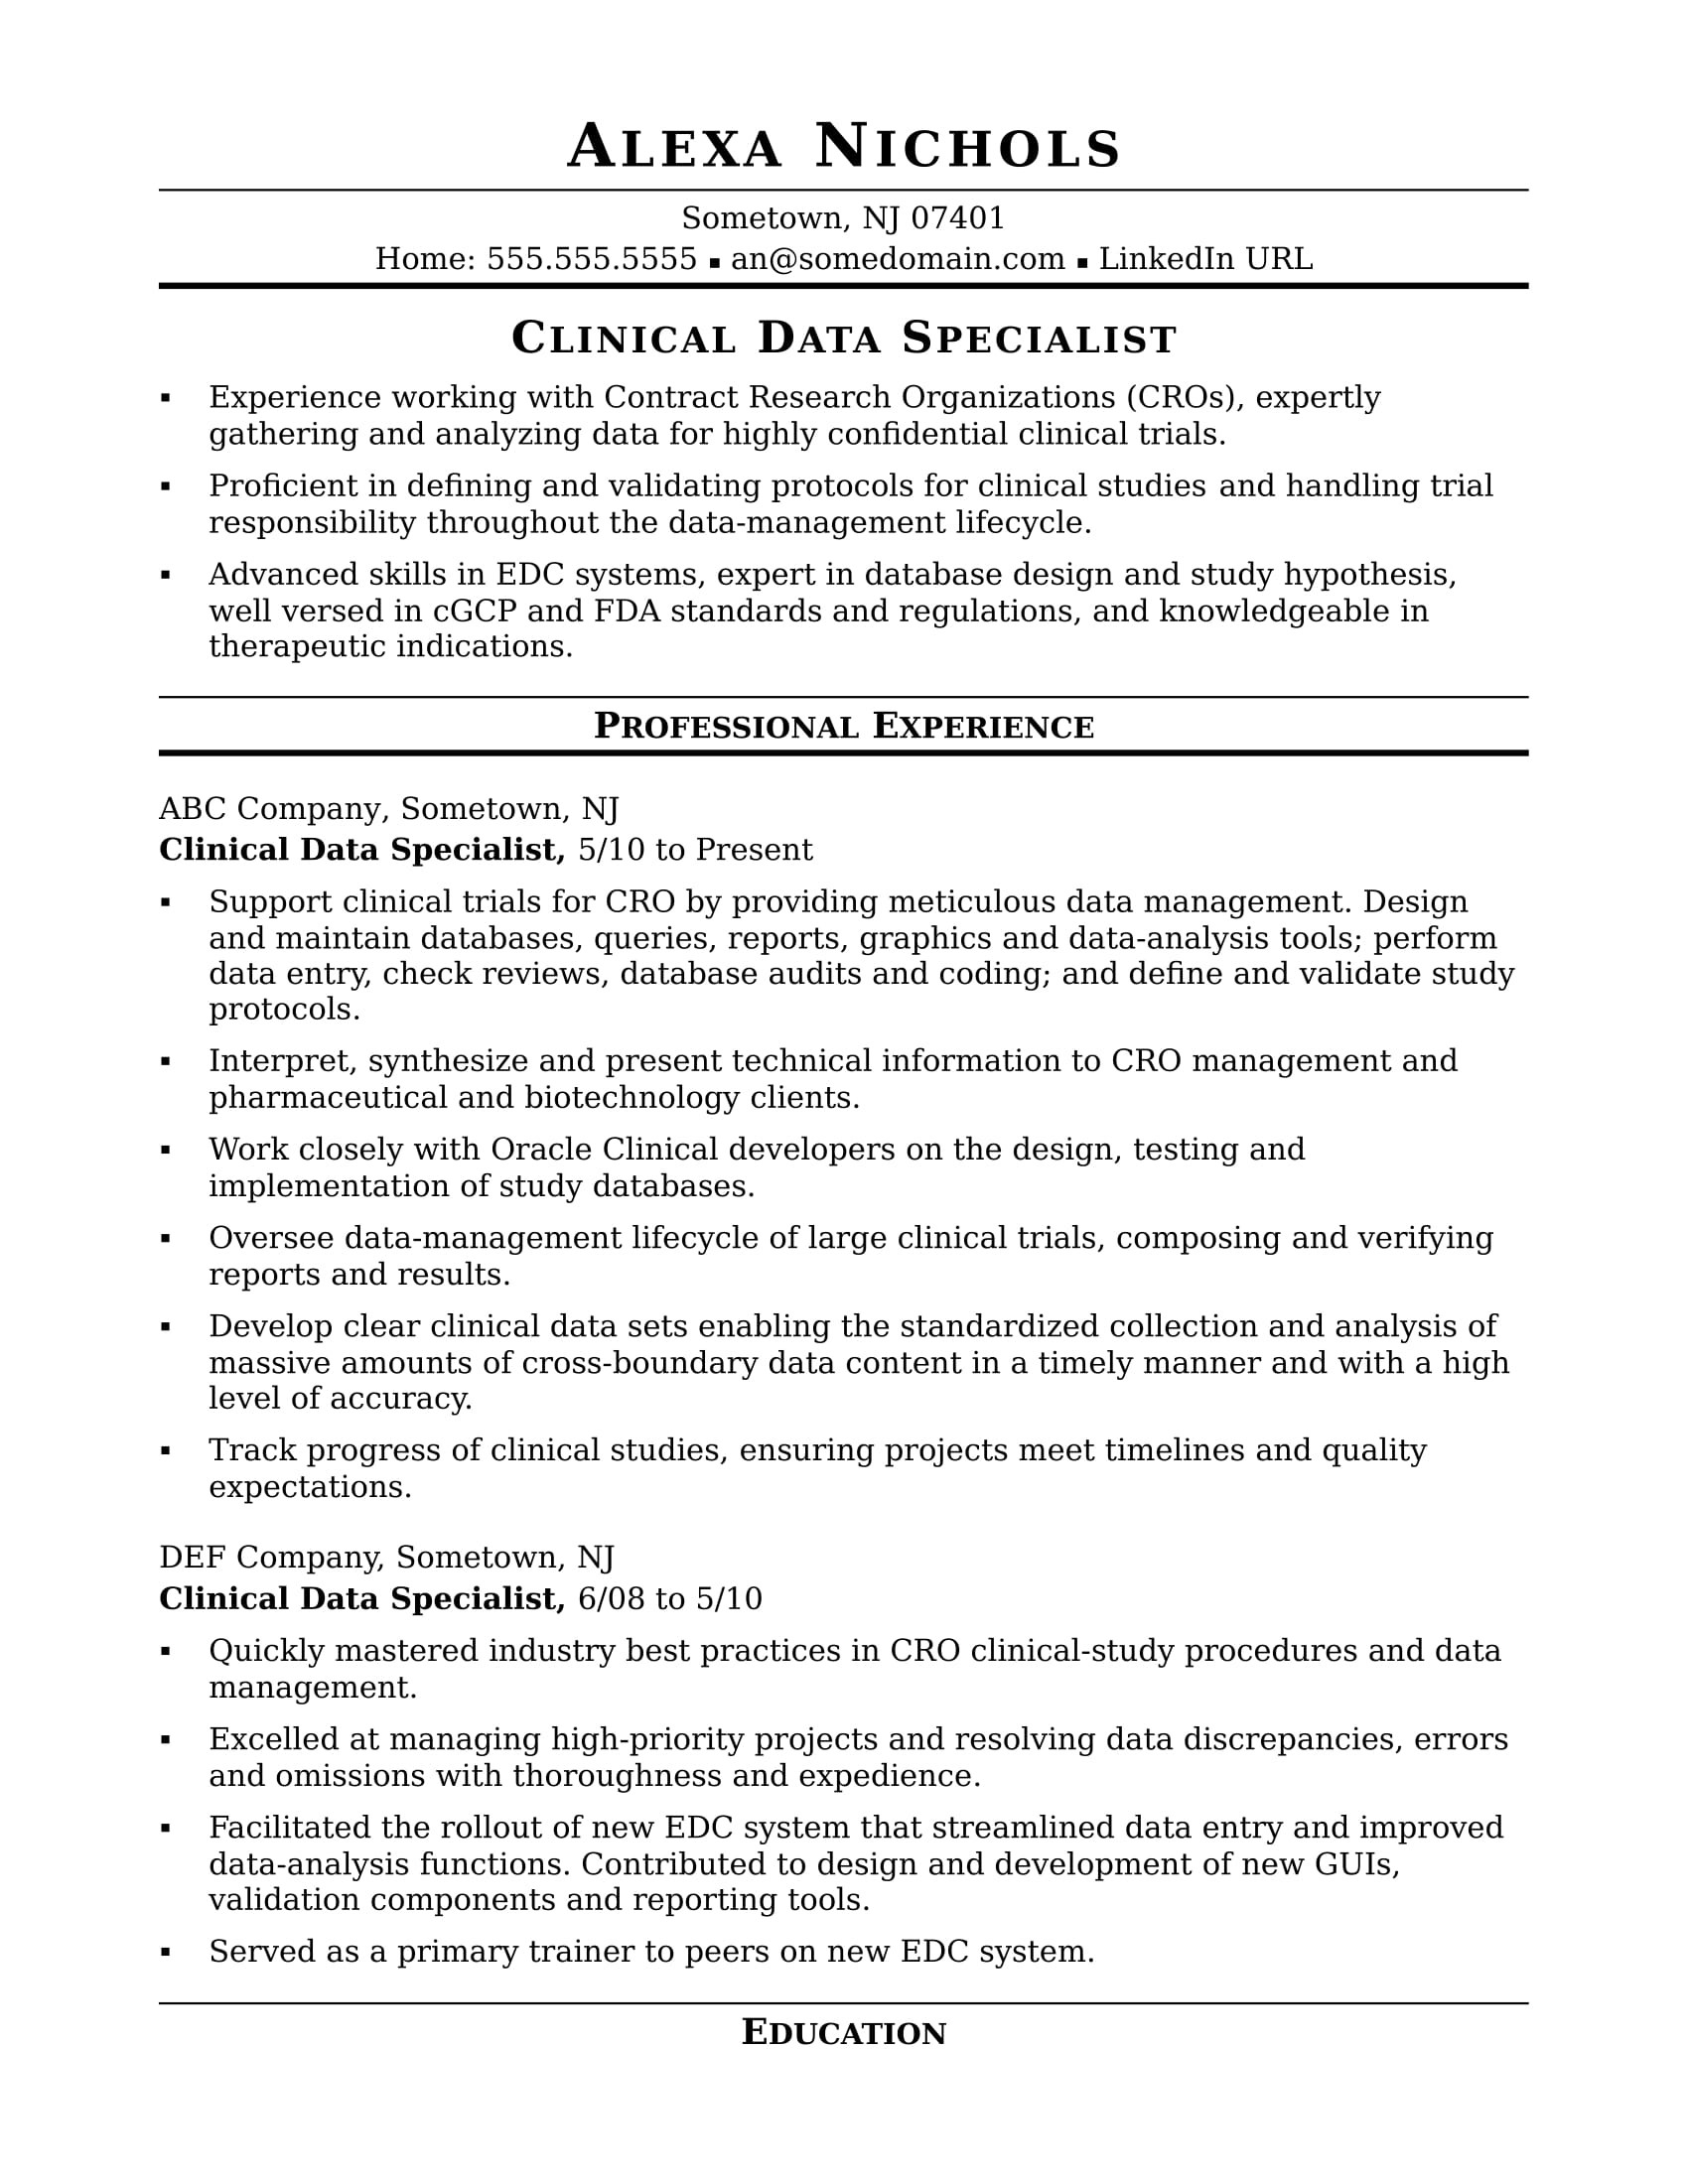 Sample Entry Leve Clinical Research Coordinator Resume Clinical Data Specialist Resume Sample Monster.com